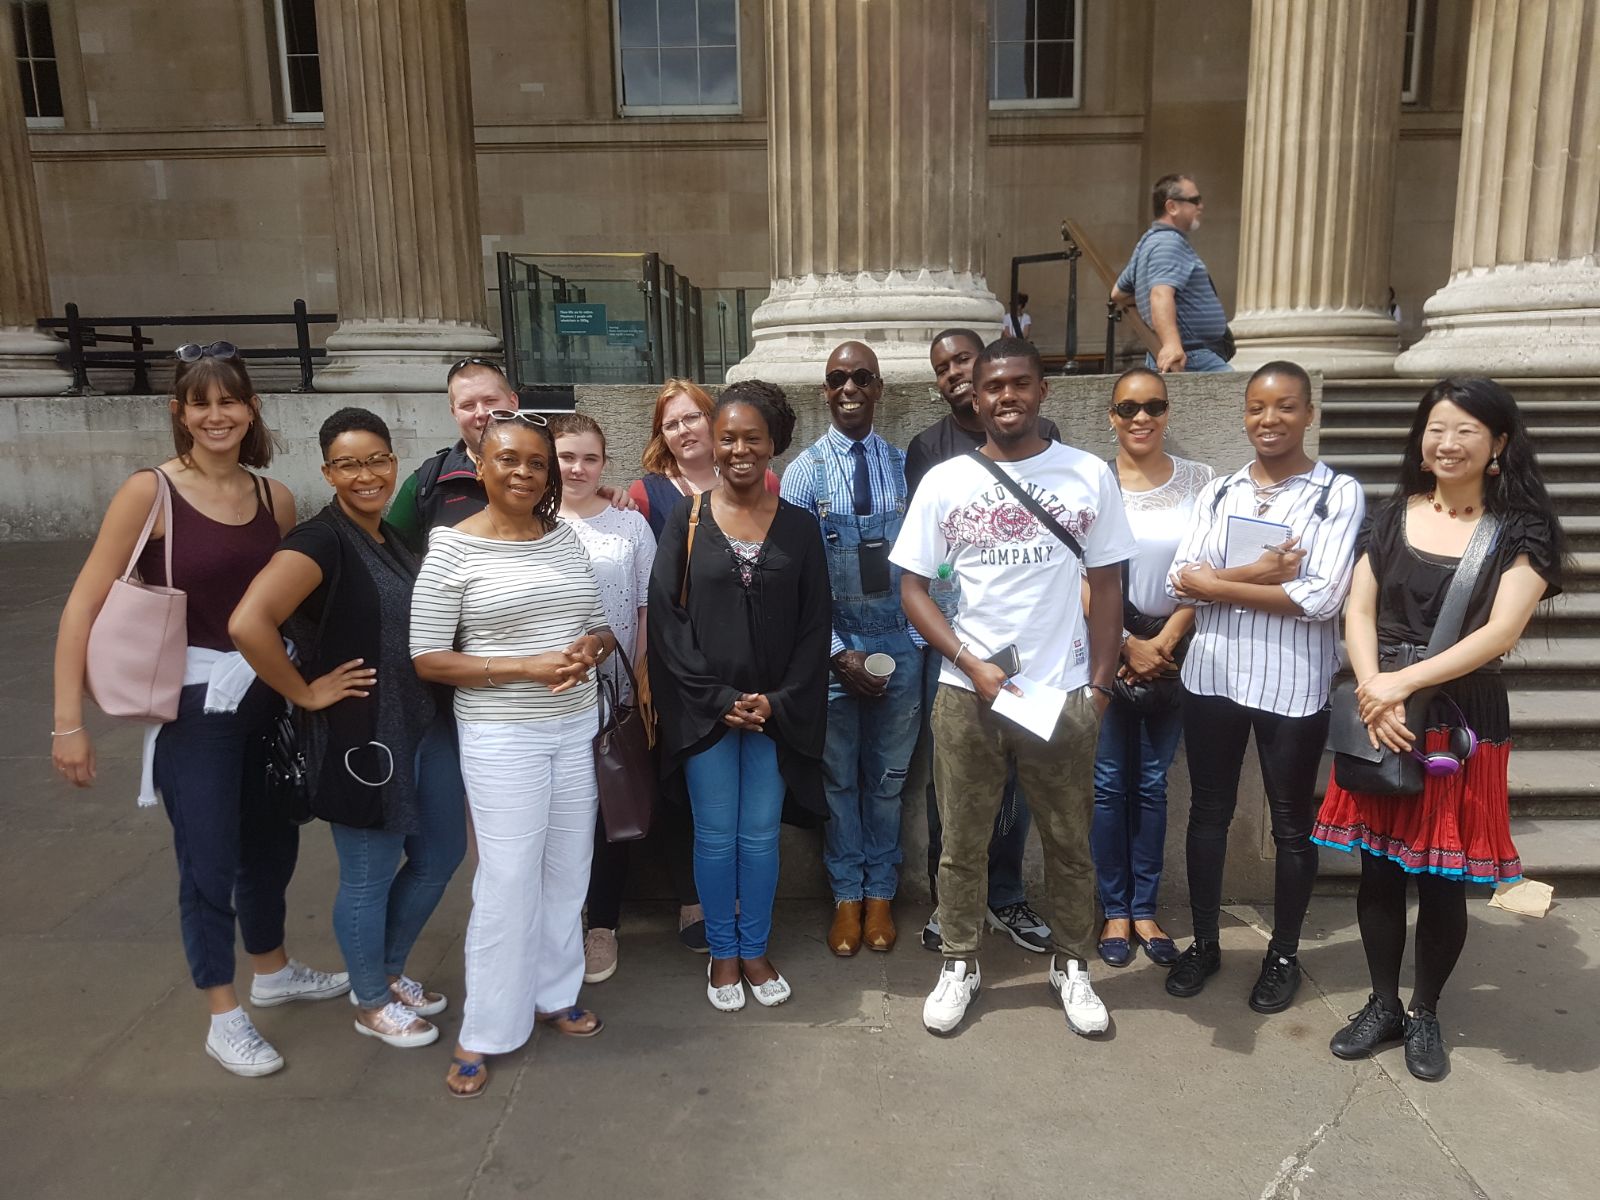 You are currently viewing Black History of the British Museum Tour